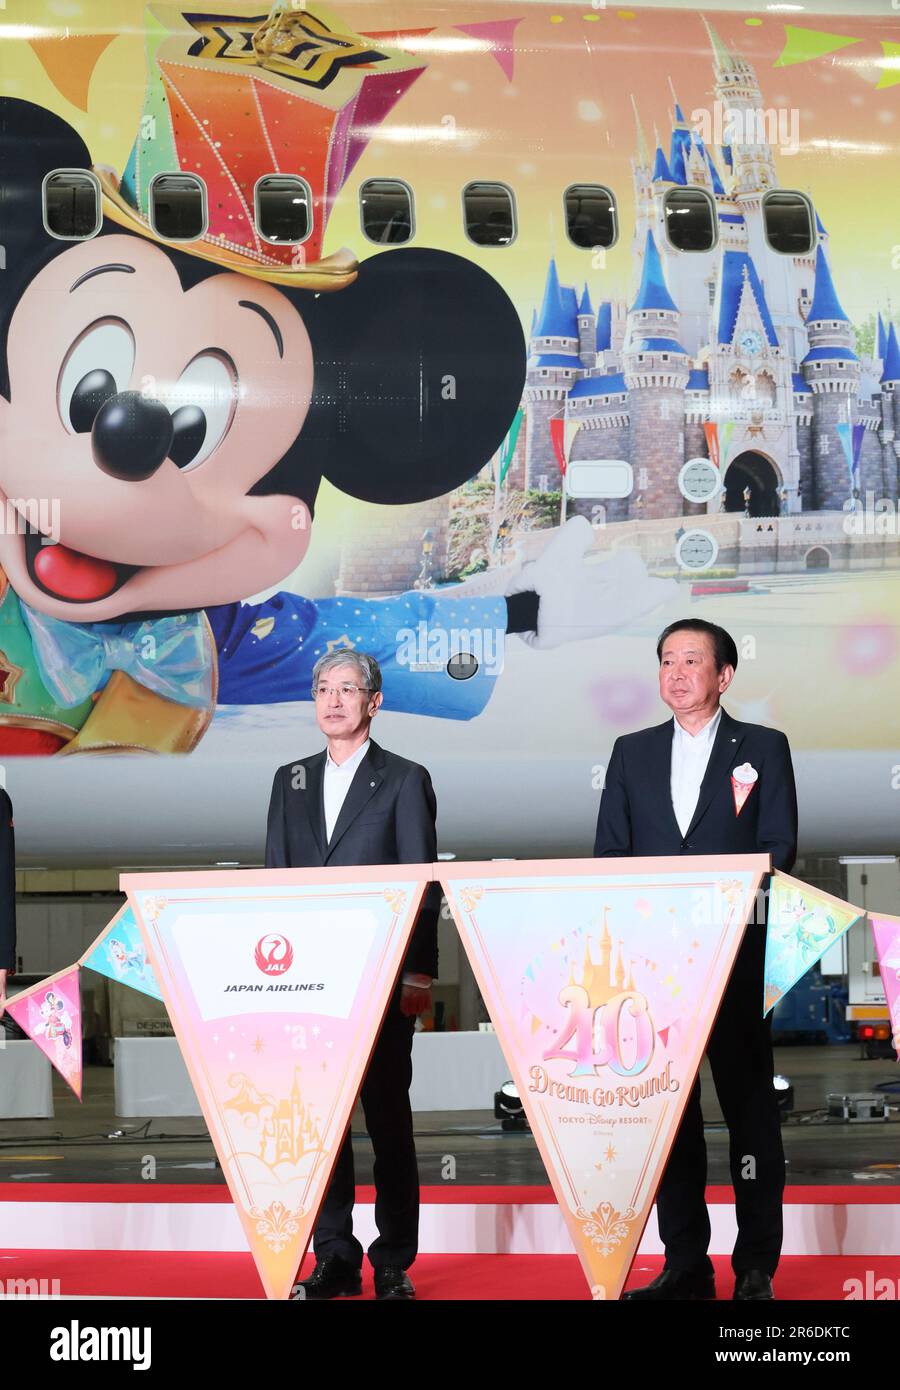 Tokyo, Japan. 9th June, 2023. Japan Airlines (JAL) president Yuji Akasaka (L) and Tokyo Disney Resort operator Oriental Land president Kenji Yoshida (R) with their employees display the 'JAL Colorful Dreams Express' jetliner to celebrate the Disneyland's 40th anniversary at a JAL hangar at the Haneda airport in Tokyo on Friday, June 9, 2023. The new Disney characters designed Boeing 767 launched JAL's domestic routes. (photo by Yoshio Tsunoda/AFLO) Stock Photo